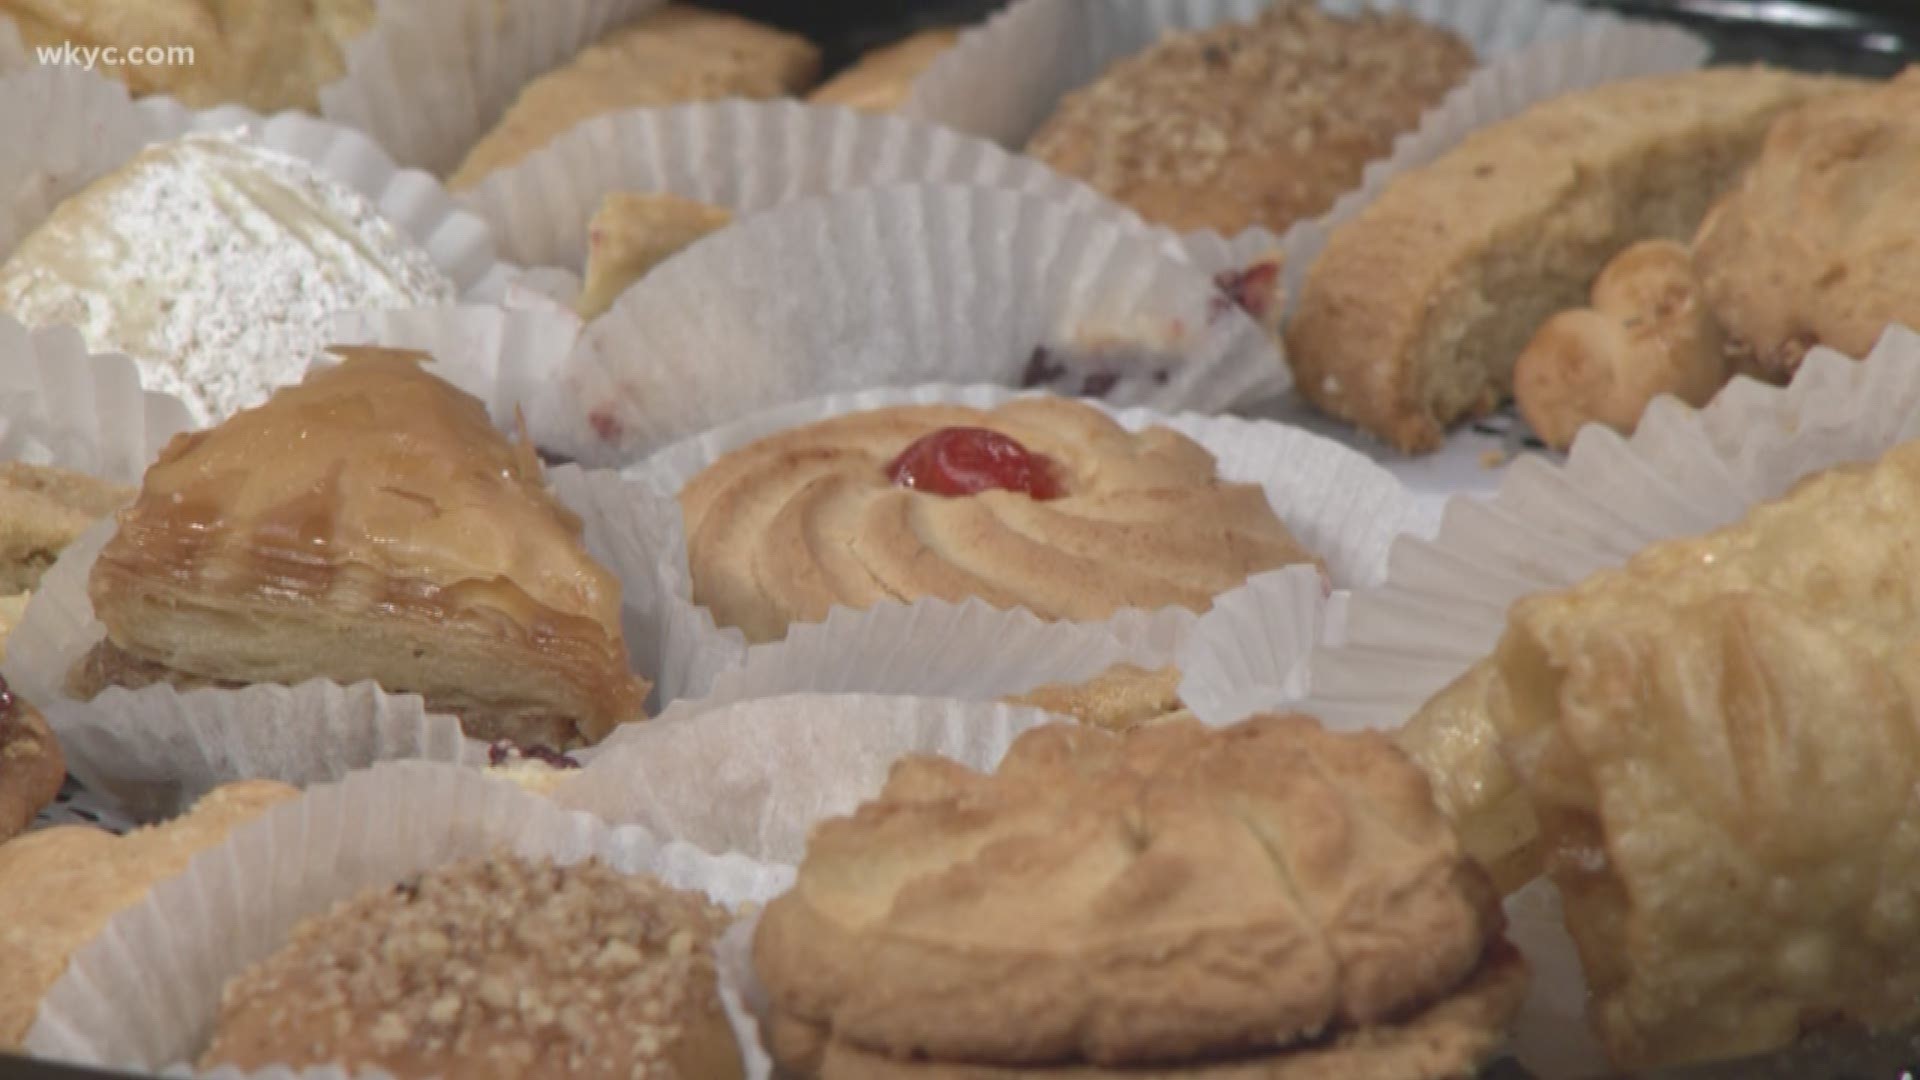 July 2019: Looking for something to do this weekend? The St. Paul Grecian Festival is back in North Royalton. To get you in the right mood, we had the experts come in with an overview of the perfect pastries to sink your teeth into.